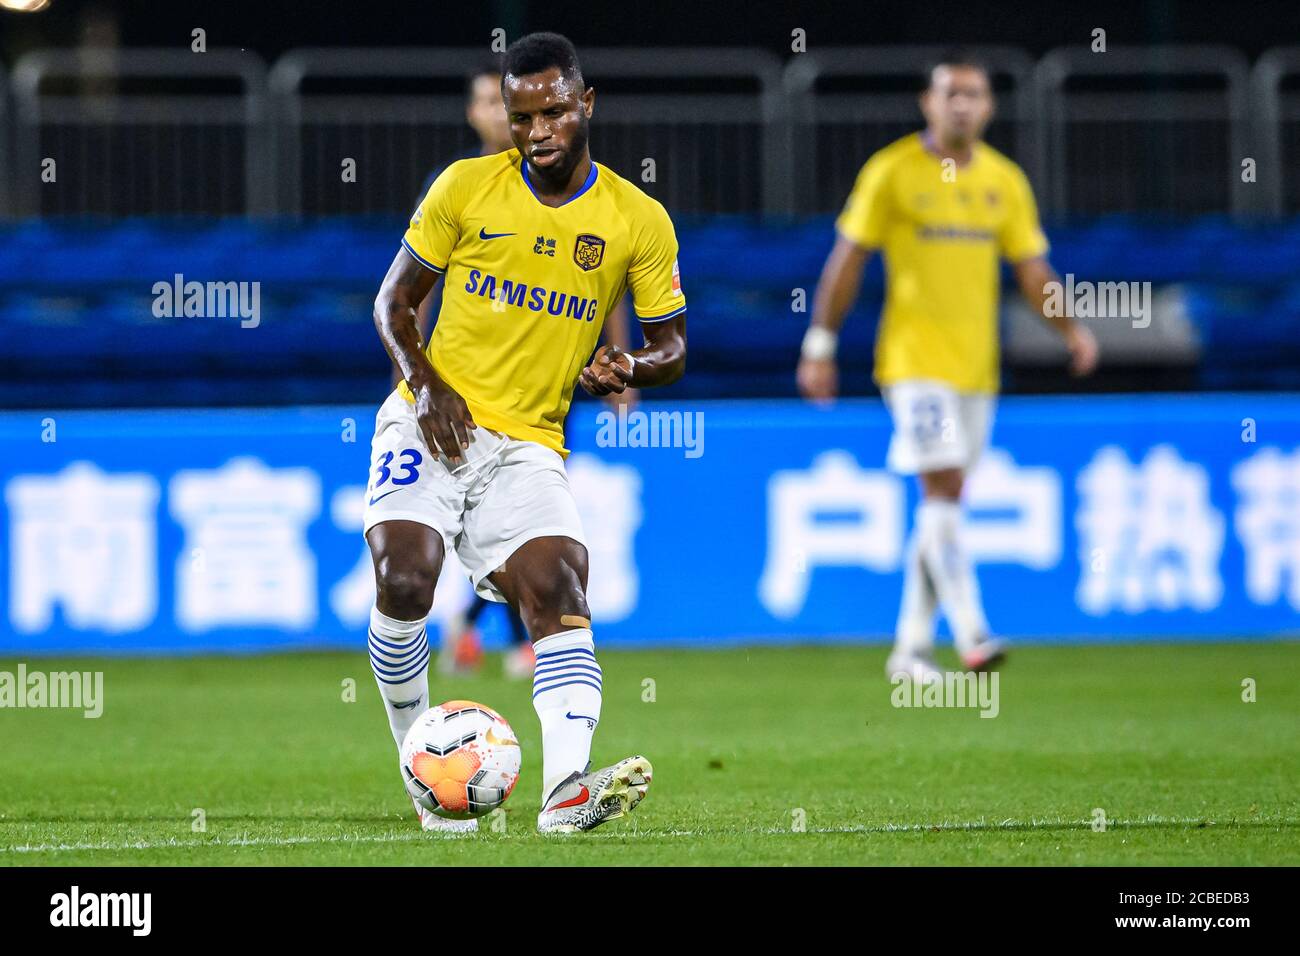 Ghanaian football player Mubarak Wakaso of Jiangsu Suning F.C. keeps the ball during the fourth -round match of 2020 Chinese Super League (CSL) against Guangzhou R&F F.C., Dalian city, northeast China's Liaoning province, 9 August 2020. Guangzhou R&F F.C. was defeated by Jiangsu Suning F.C. with 0-2. Stock Photo